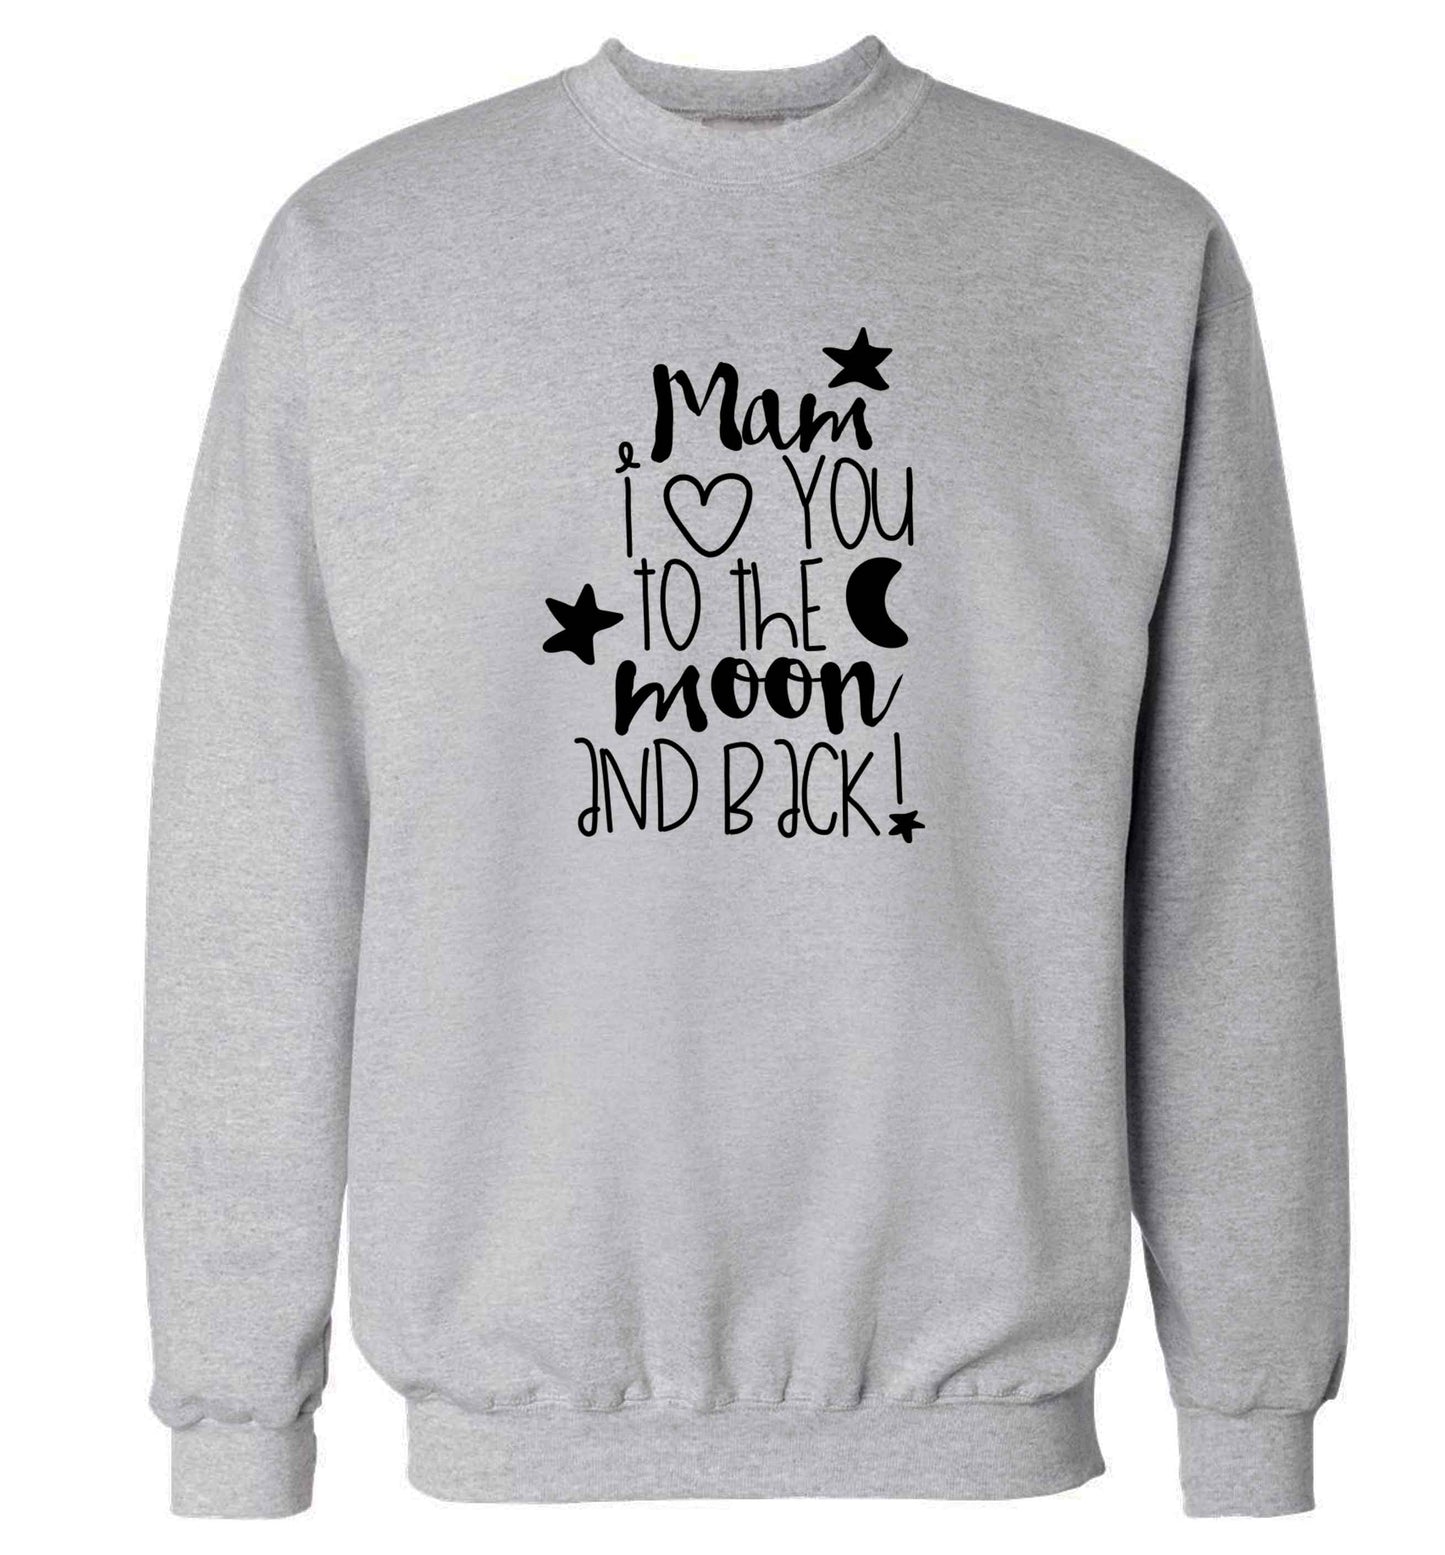 Mam I love you to the moon and back adult's unisex grey sweater 2XL